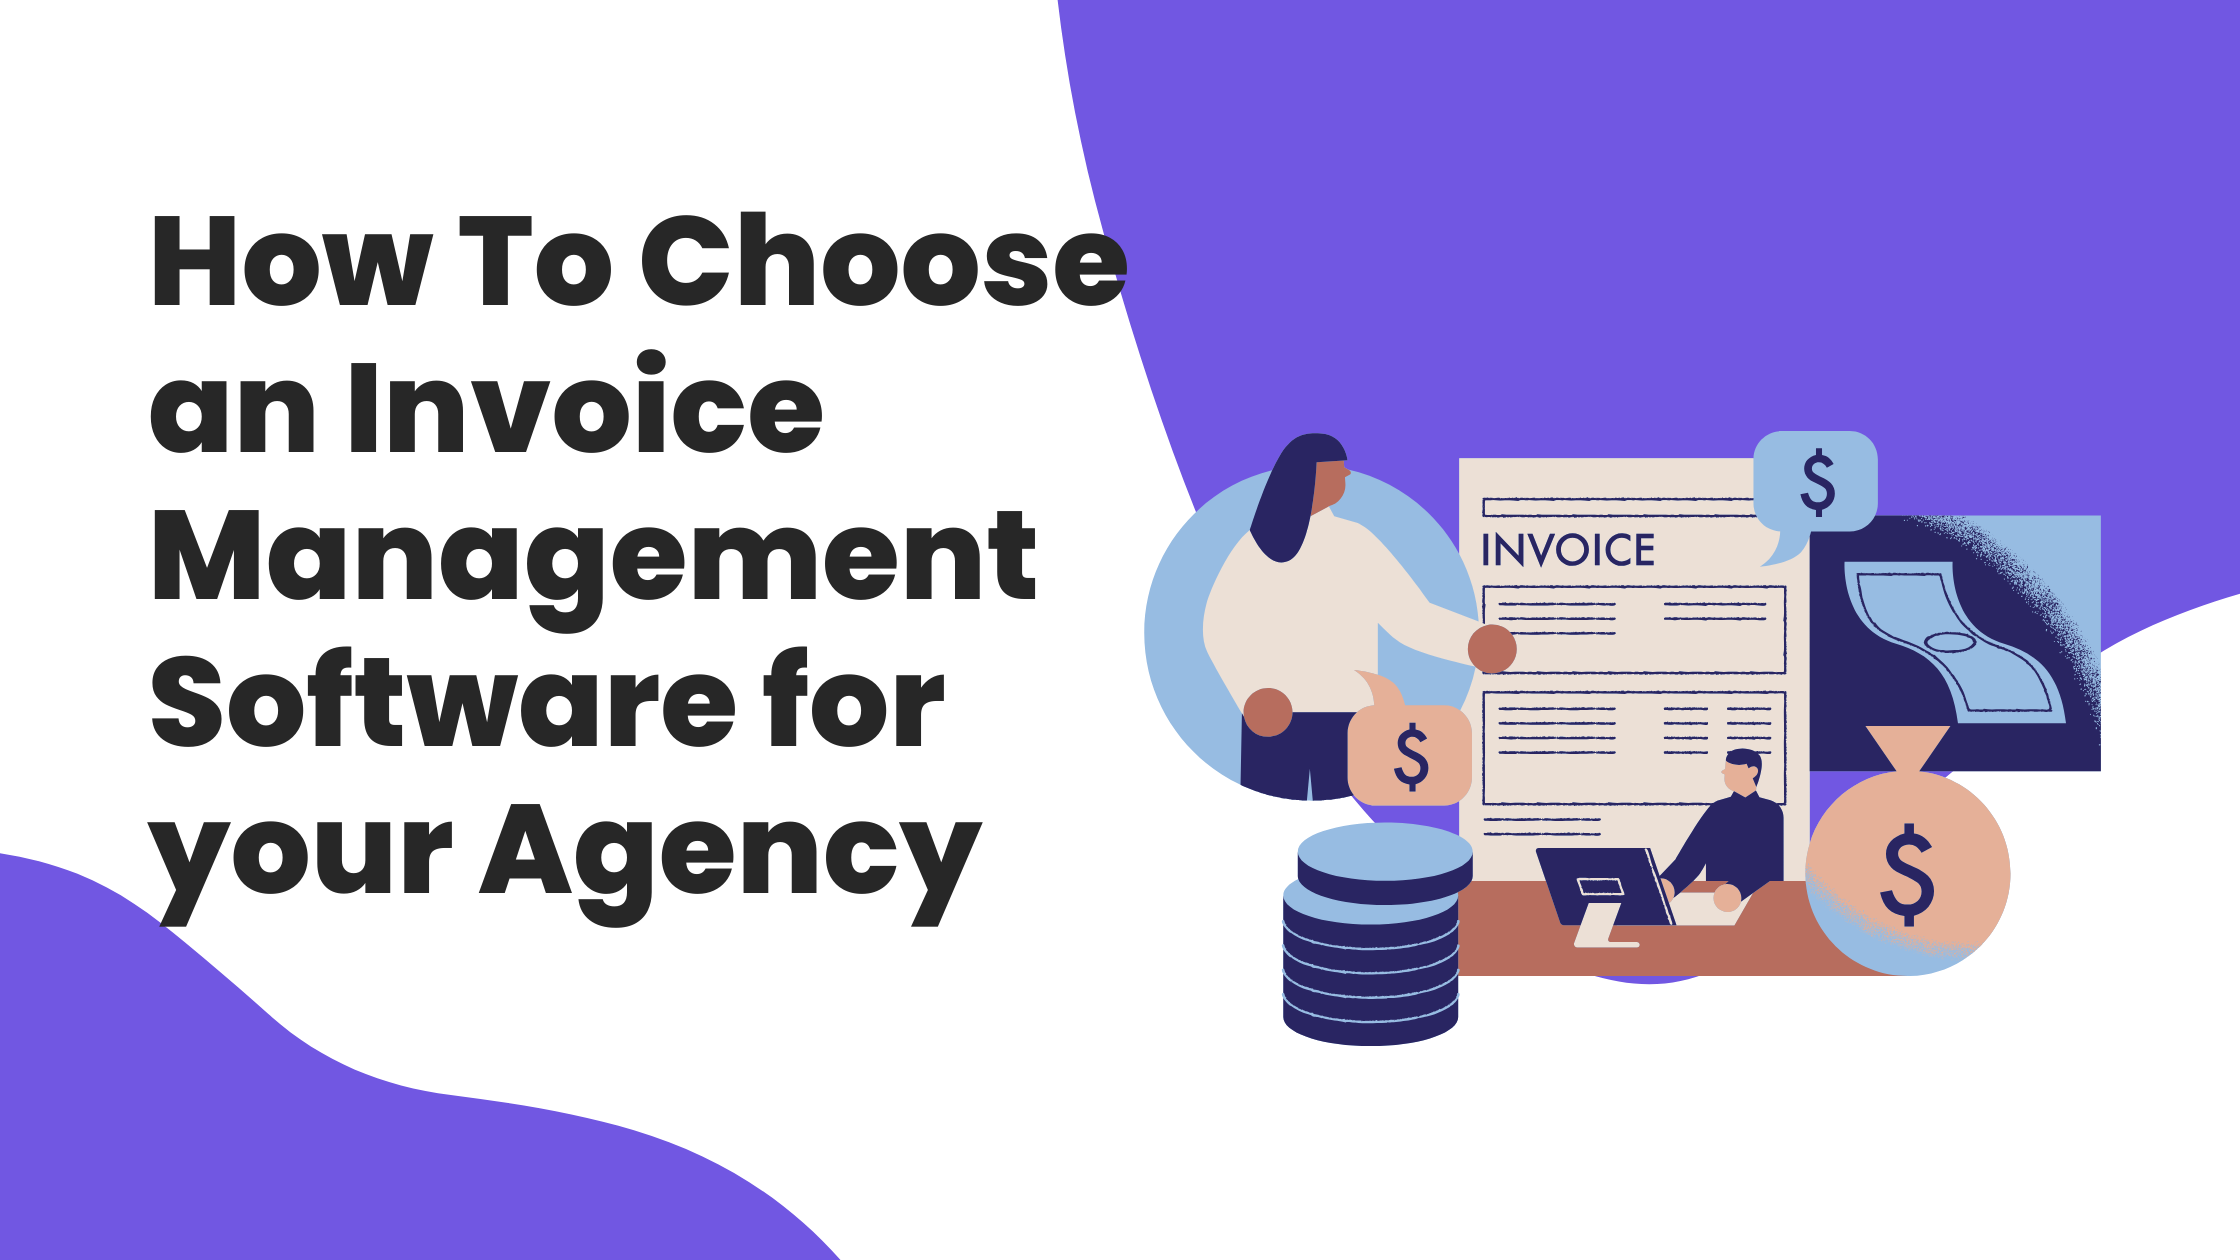 How To Choose an Invoice Management Software for your Agency: A Quick Guide